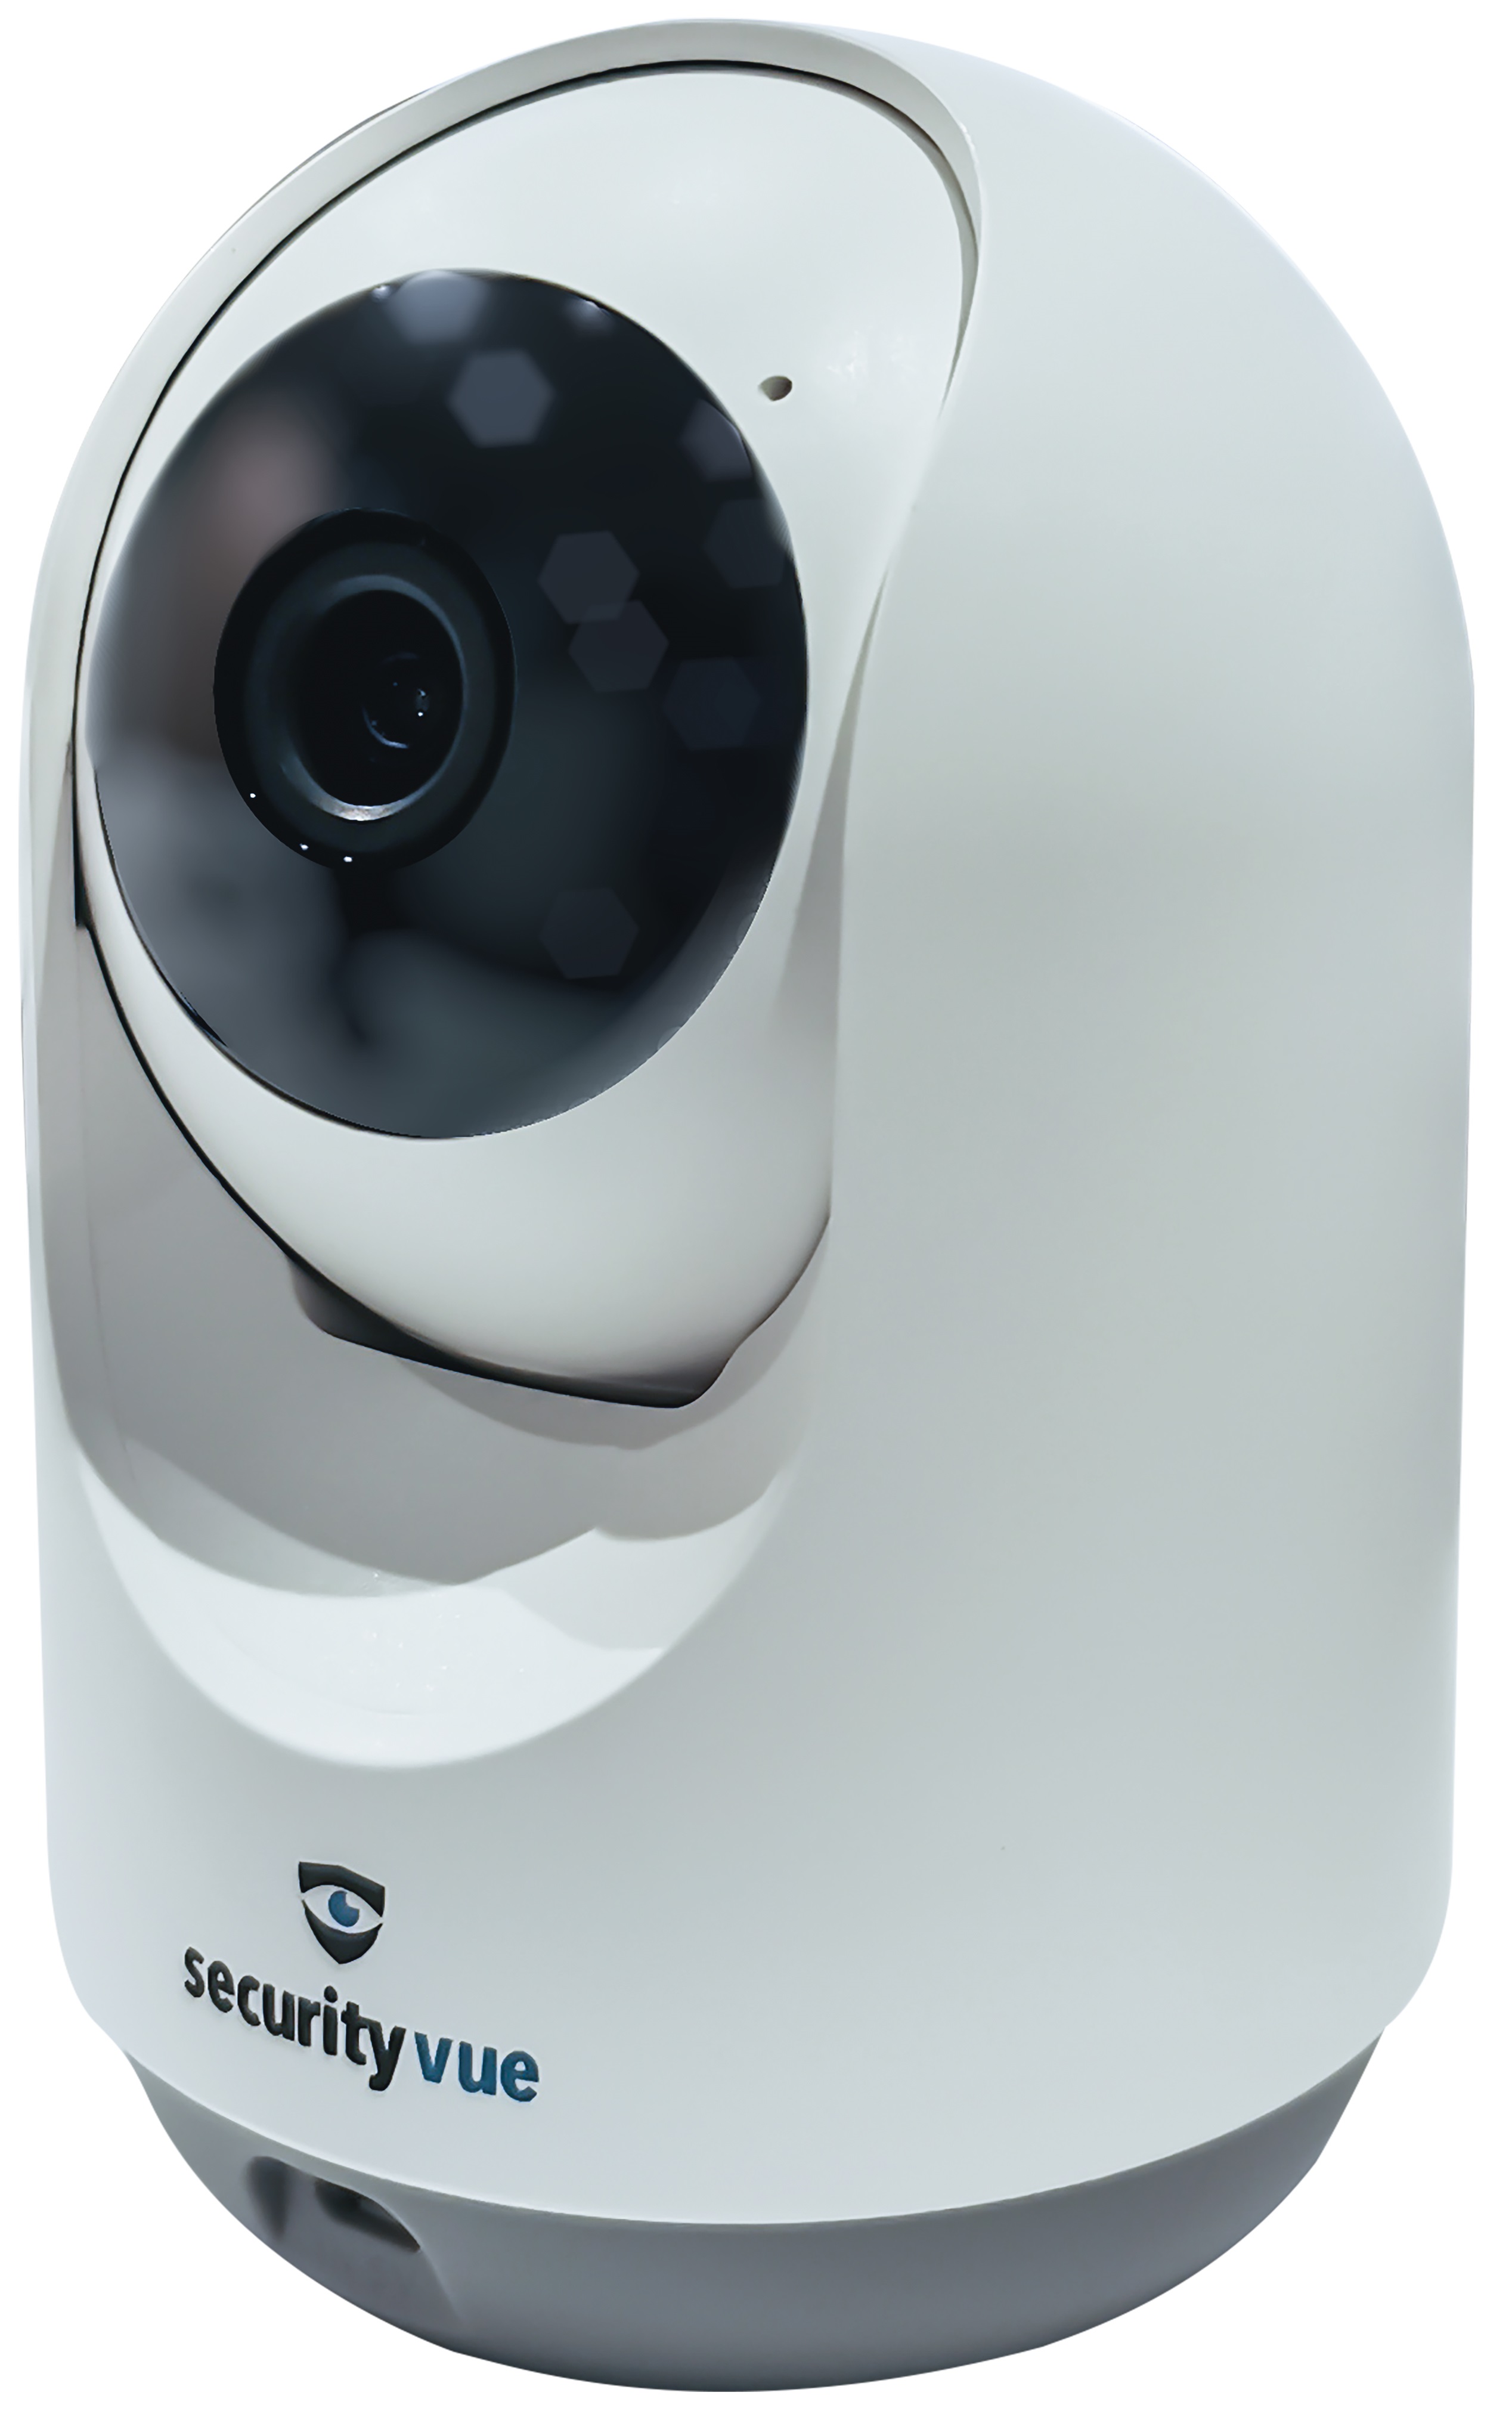 Smart home IP camera with pan & tilt. 1080P HD video quality. 1/4" Progressive scan CMOS sensor. Night vision up to 8M. Support pan & tilt (Horizontal 355° & vertical 90°). Support Wi-Fi & QR scan code. Support up to 128G SD card. 2-Way audio communication. Build-In microphone & speaker. Wireless Wi-Fi App technology.